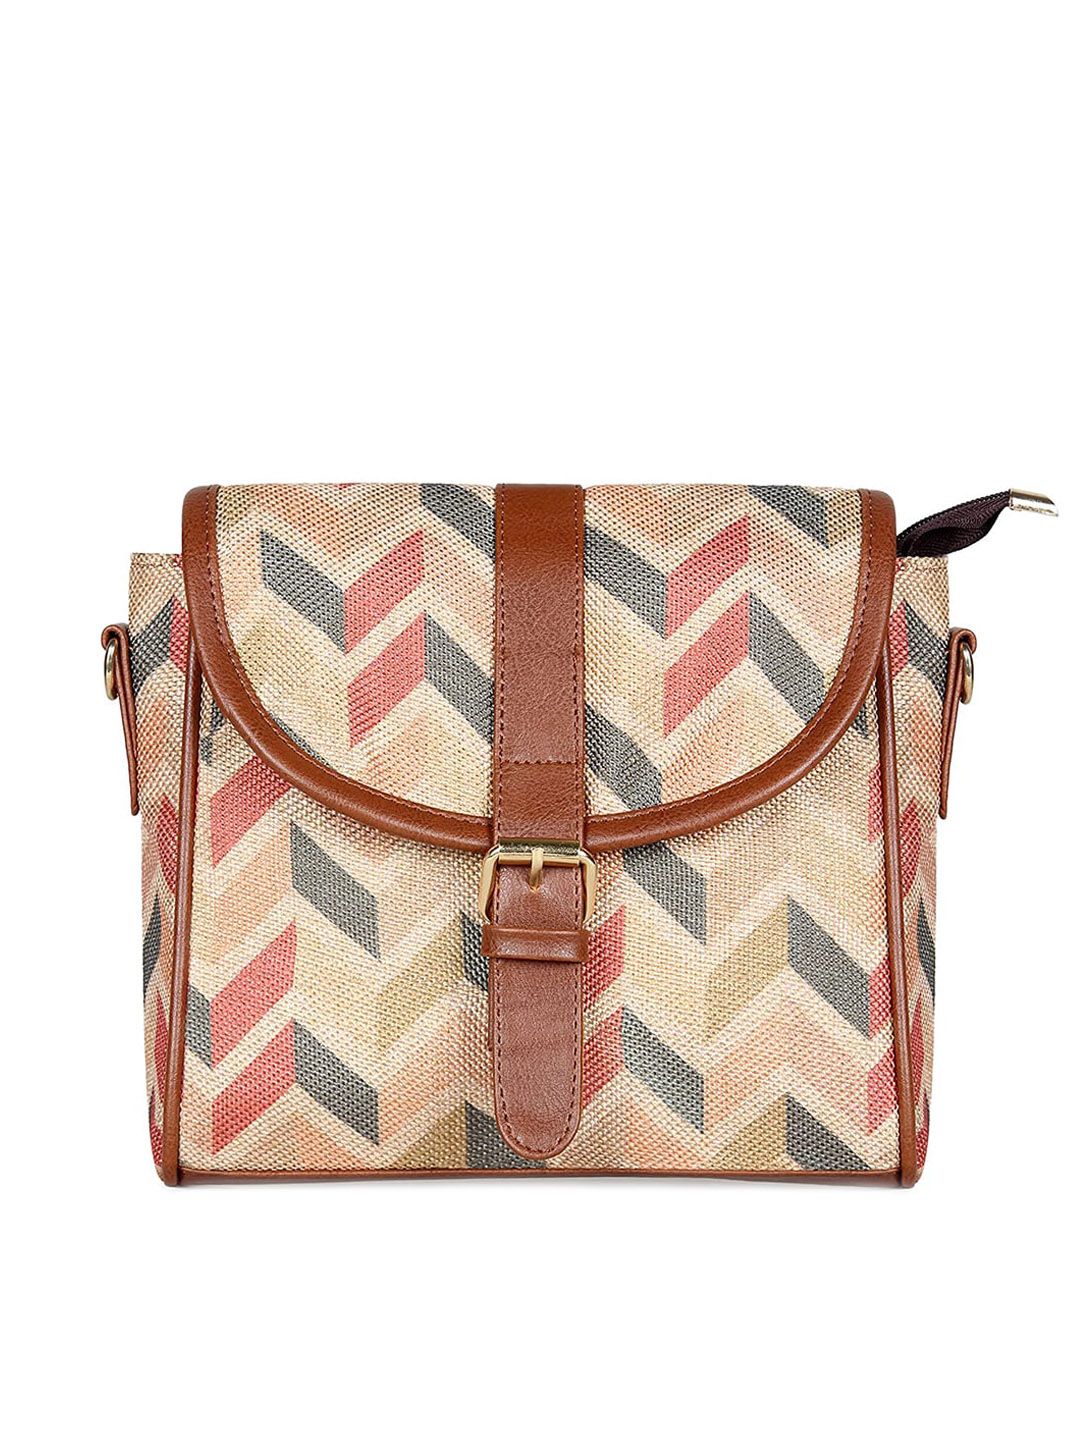 THE CLOWNFISH Beige Geometric Printed Structured Sling Bag Price in India